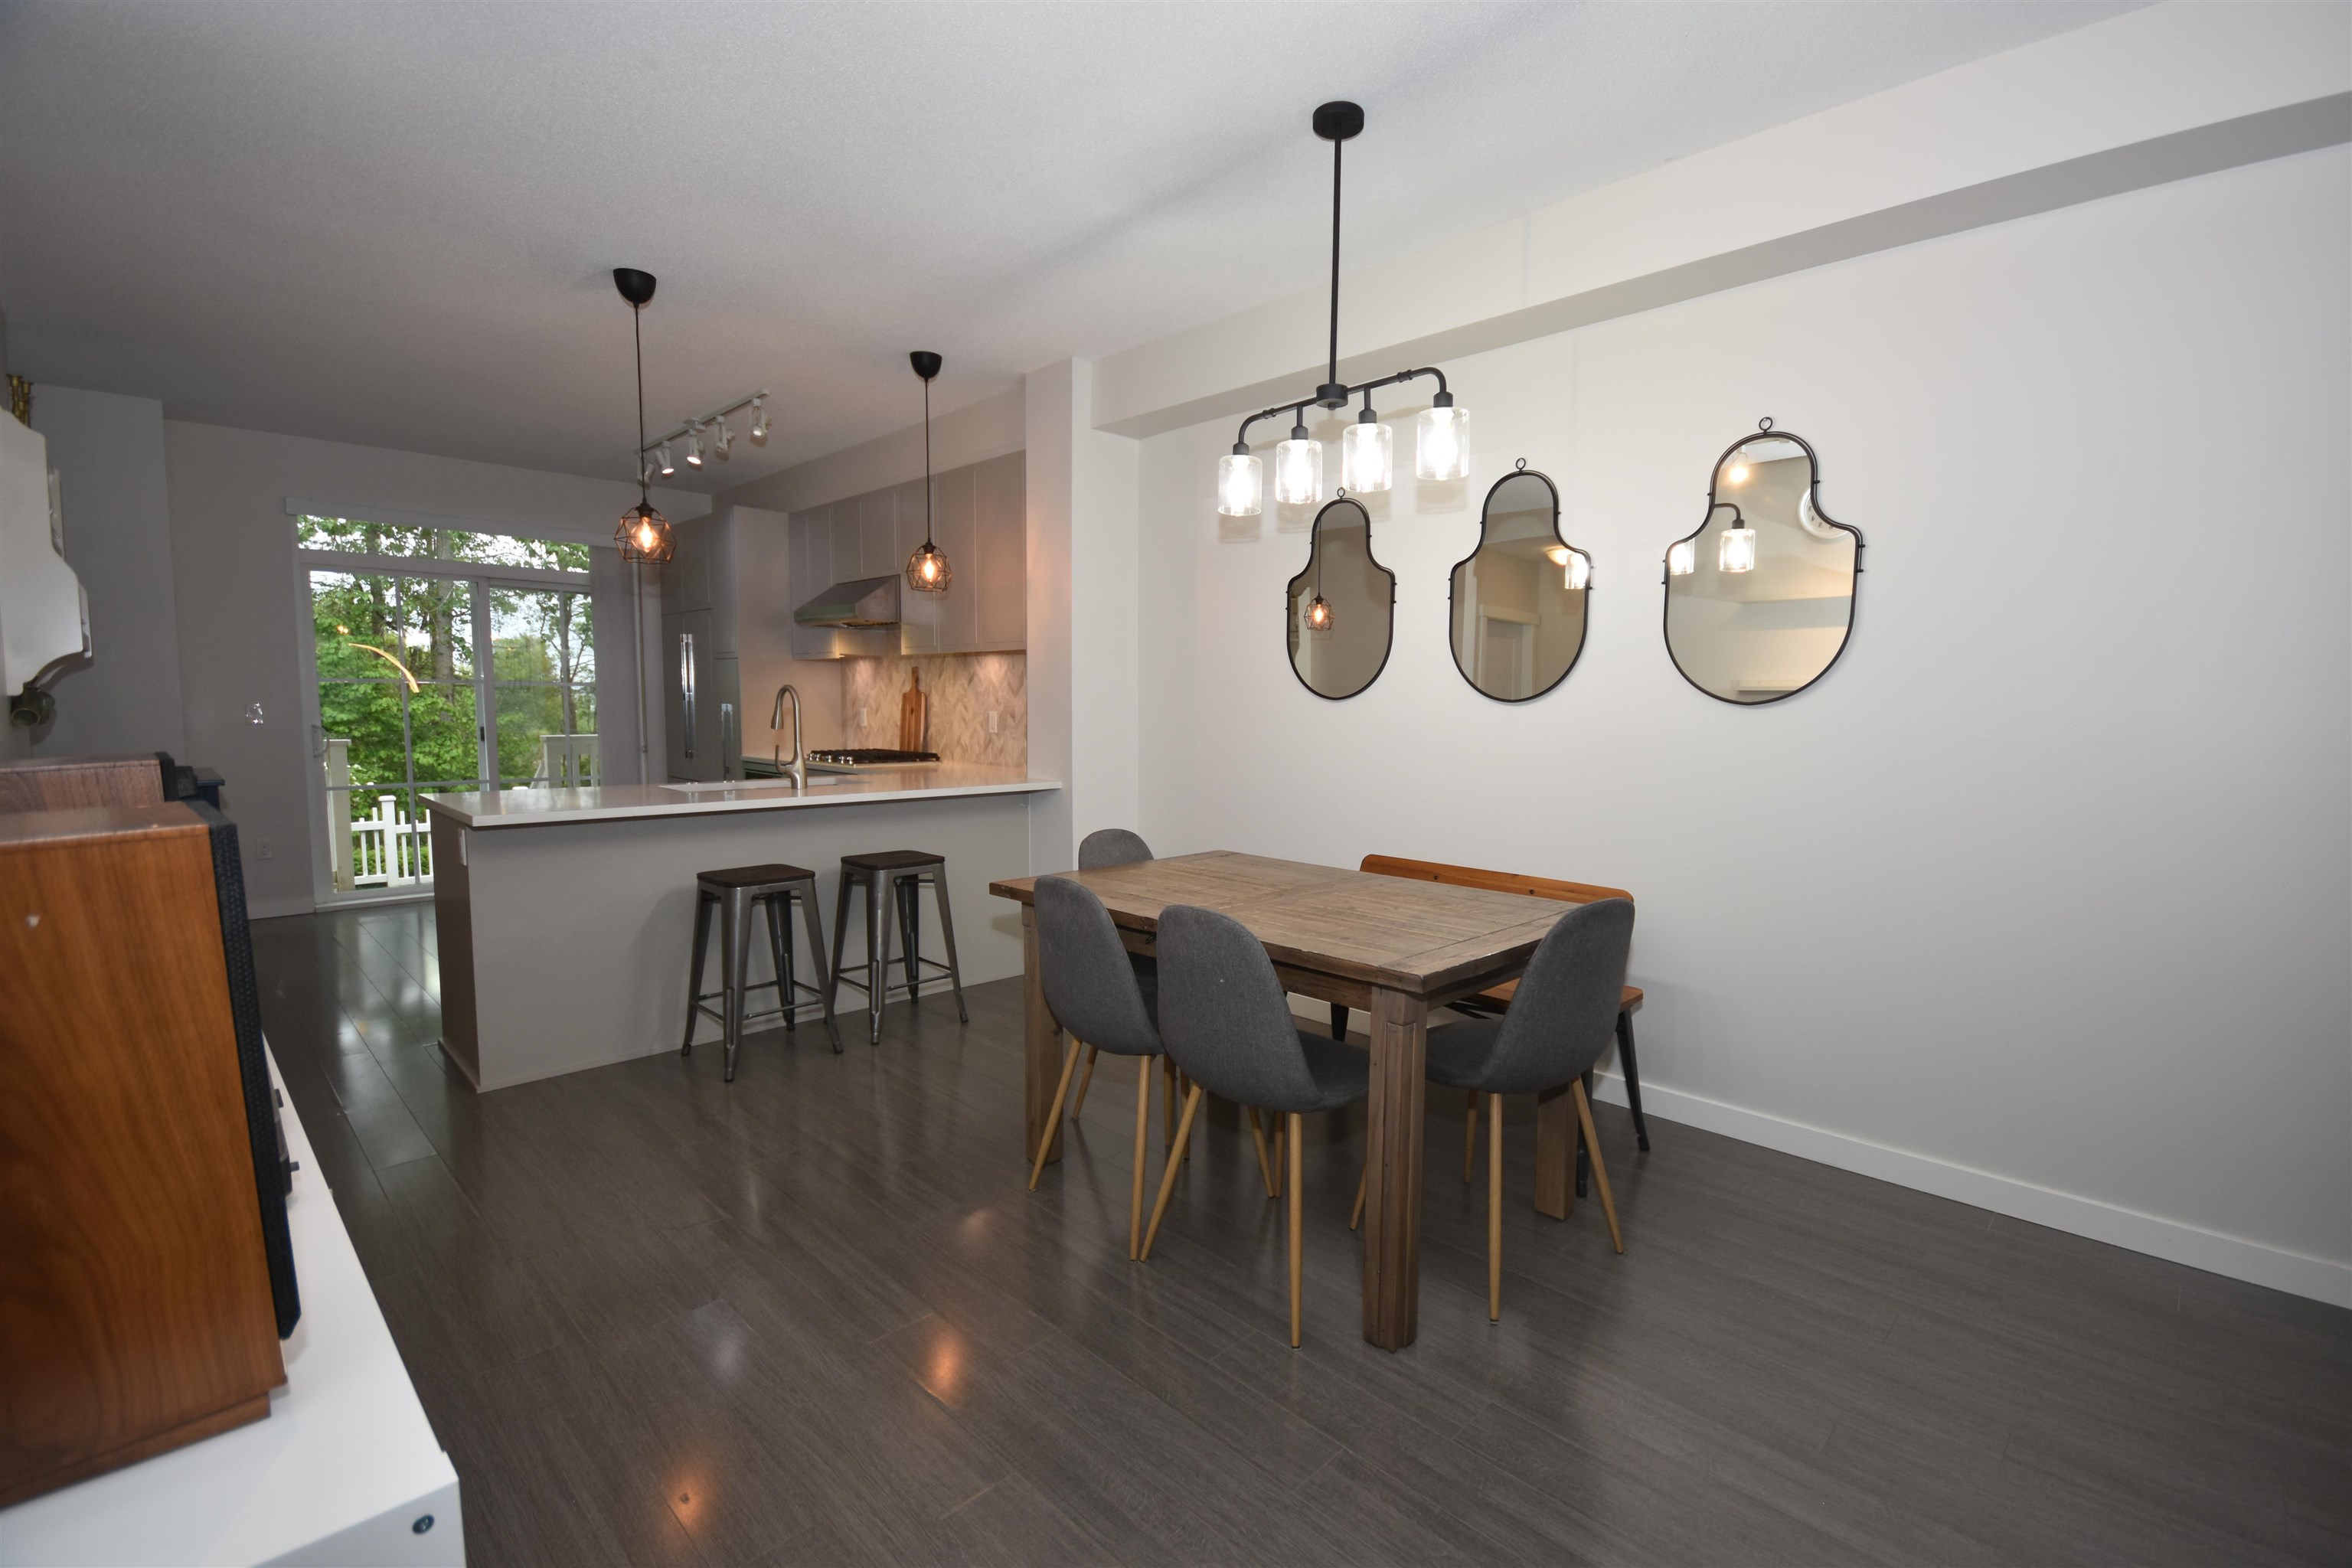 Listing image of 31 5551 ADMIRAL WAY